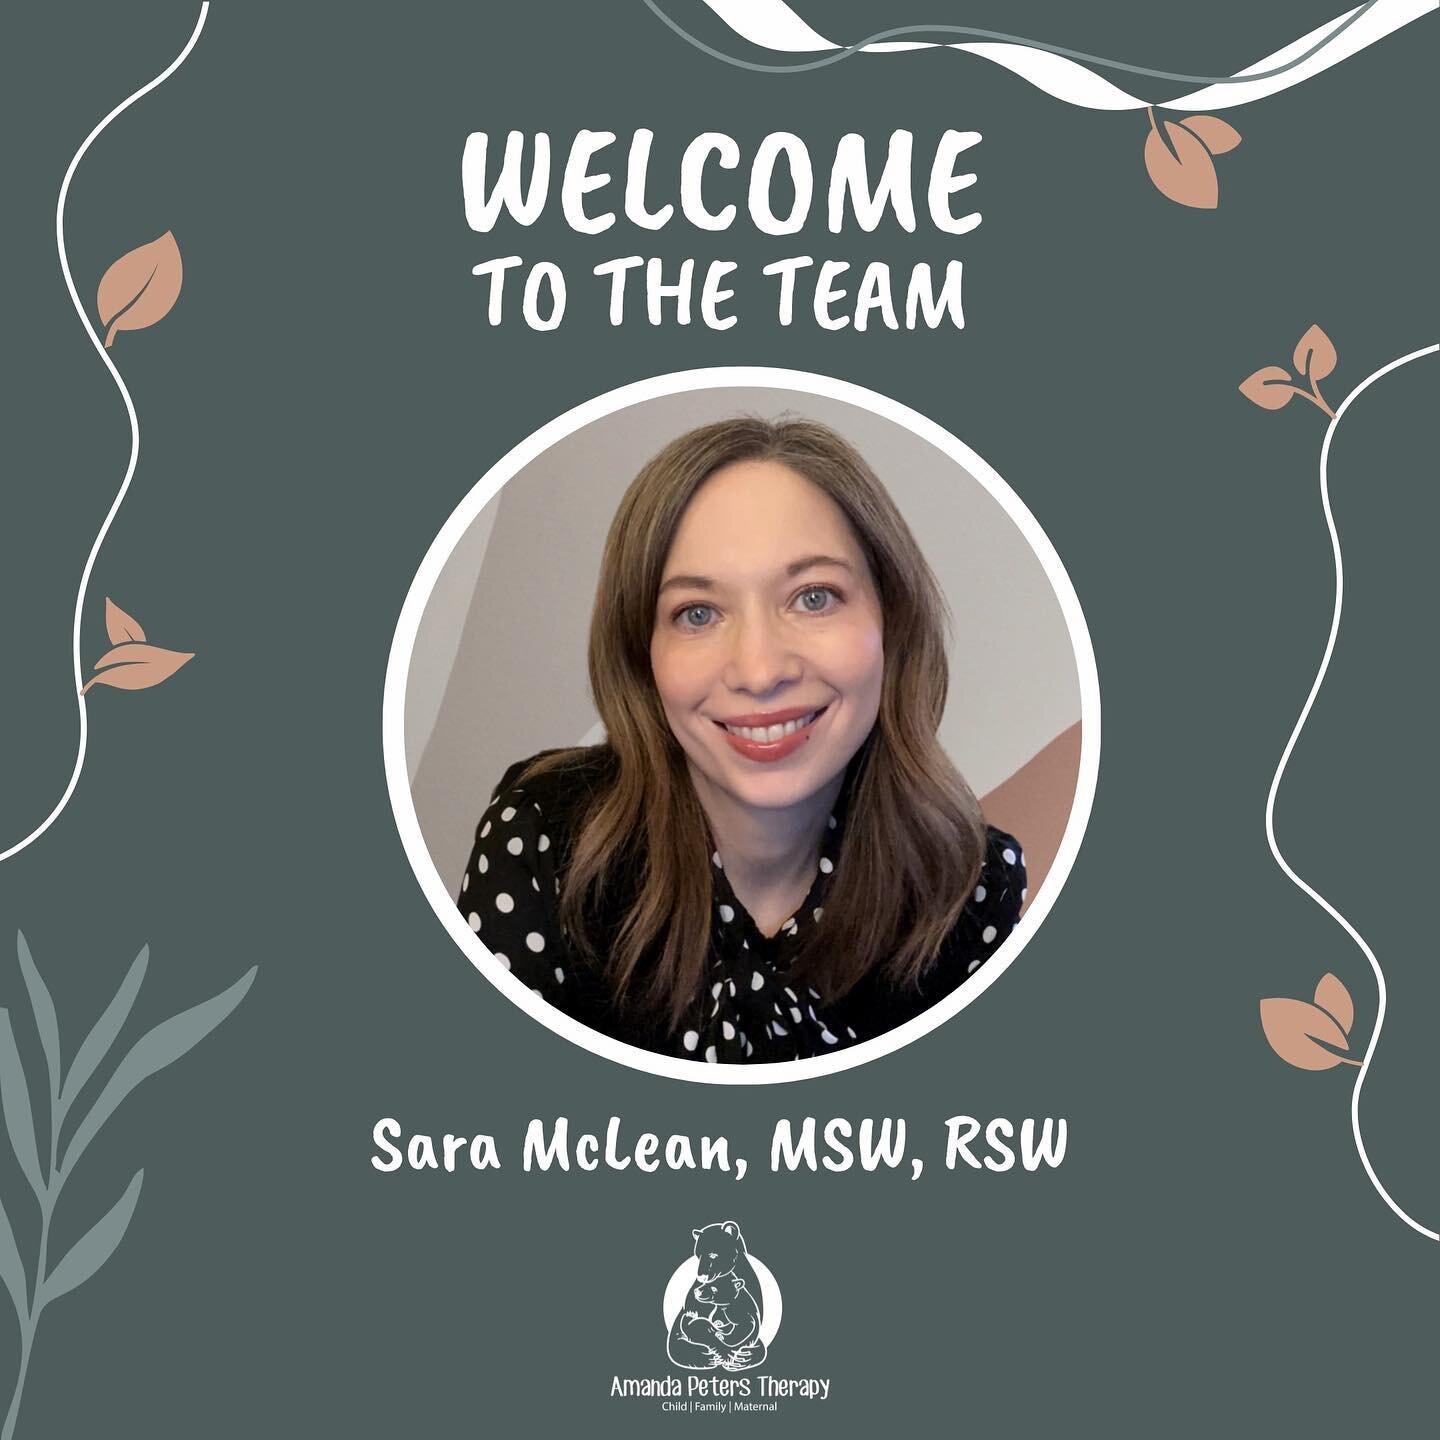 We are thrilled to welcome Sara to our team! 

Sara brings extensive experience in supporting pre-teens, teenagers and young adults, and is looking forward to the privilege of working with you! 

Sara is accepting clients aged 12+, and is available o